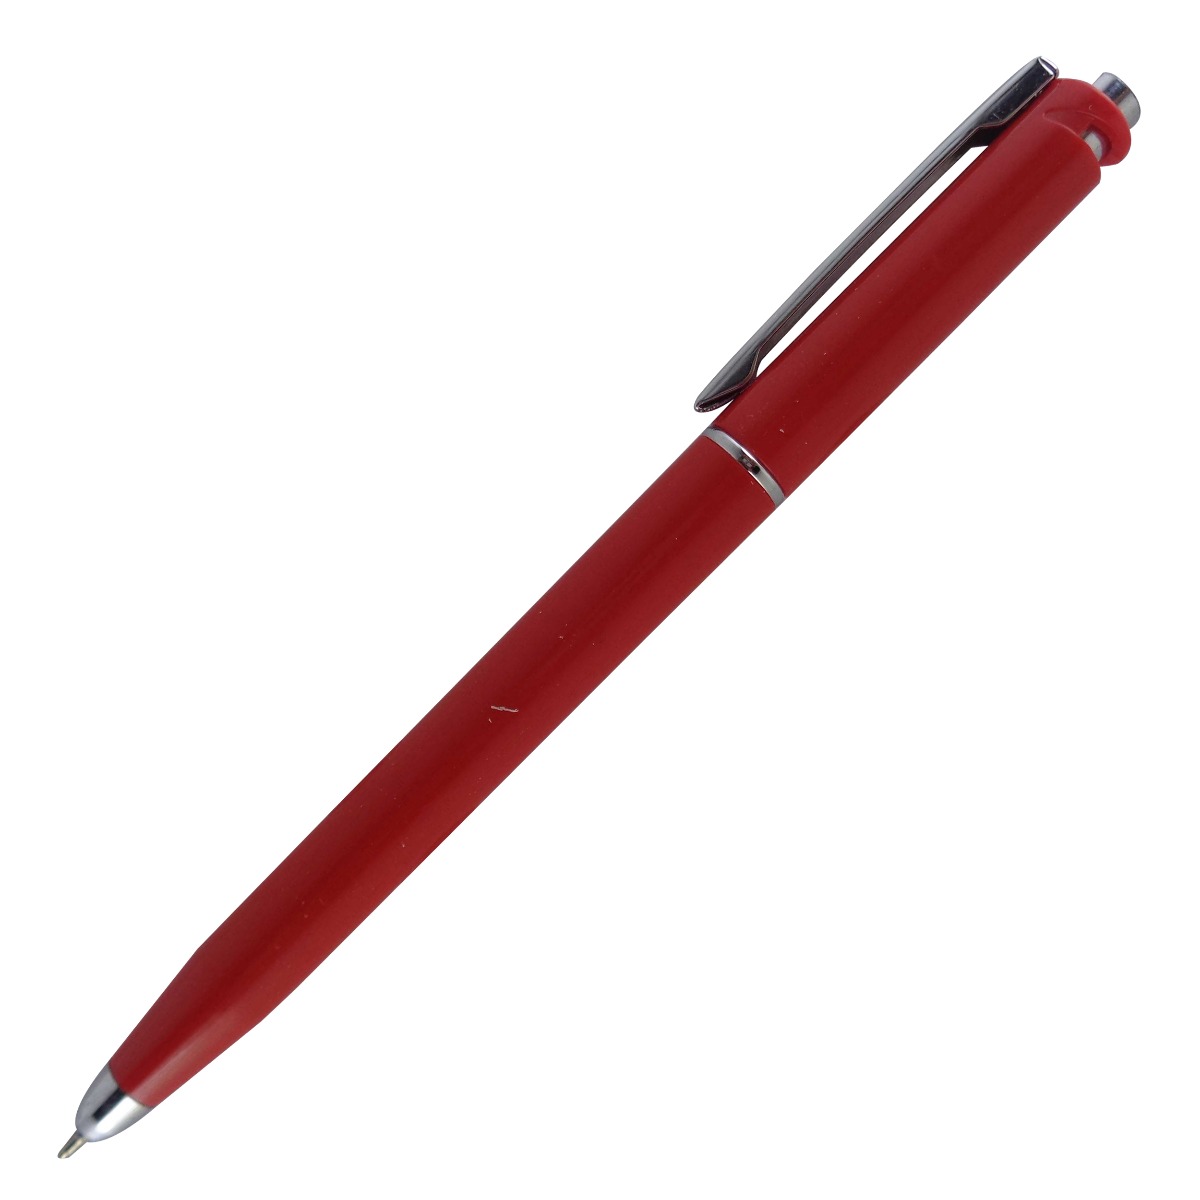 Reynolds Model: 15048 Jetter classic Red color body with silver clip fine tip retractable ball pen